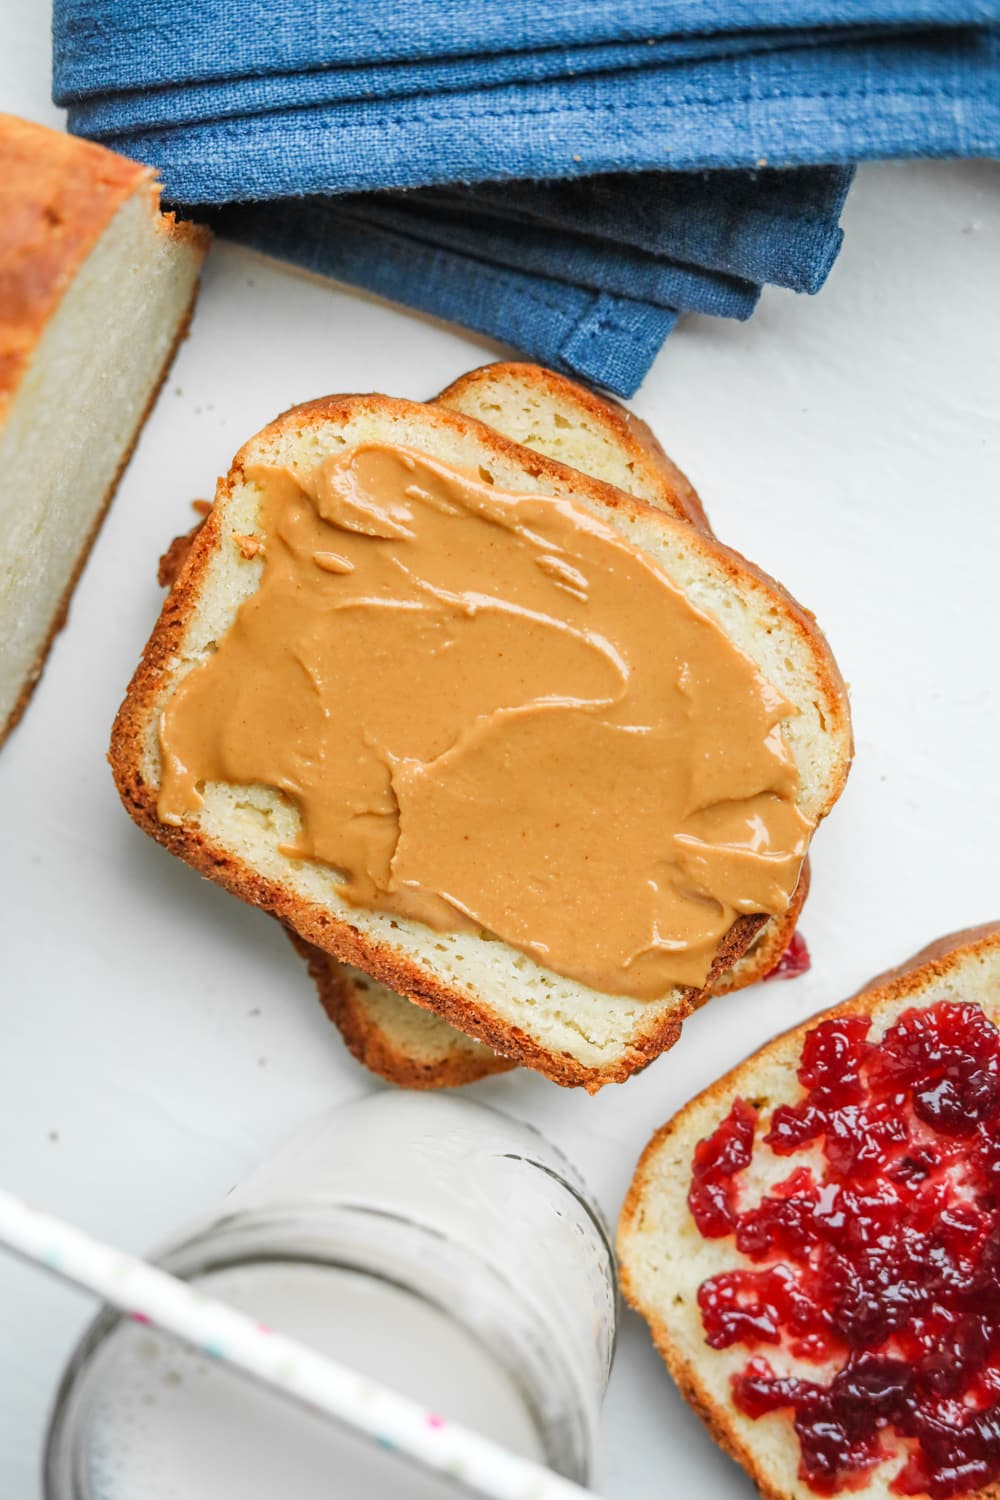 A slice of bread with peanut butter on it